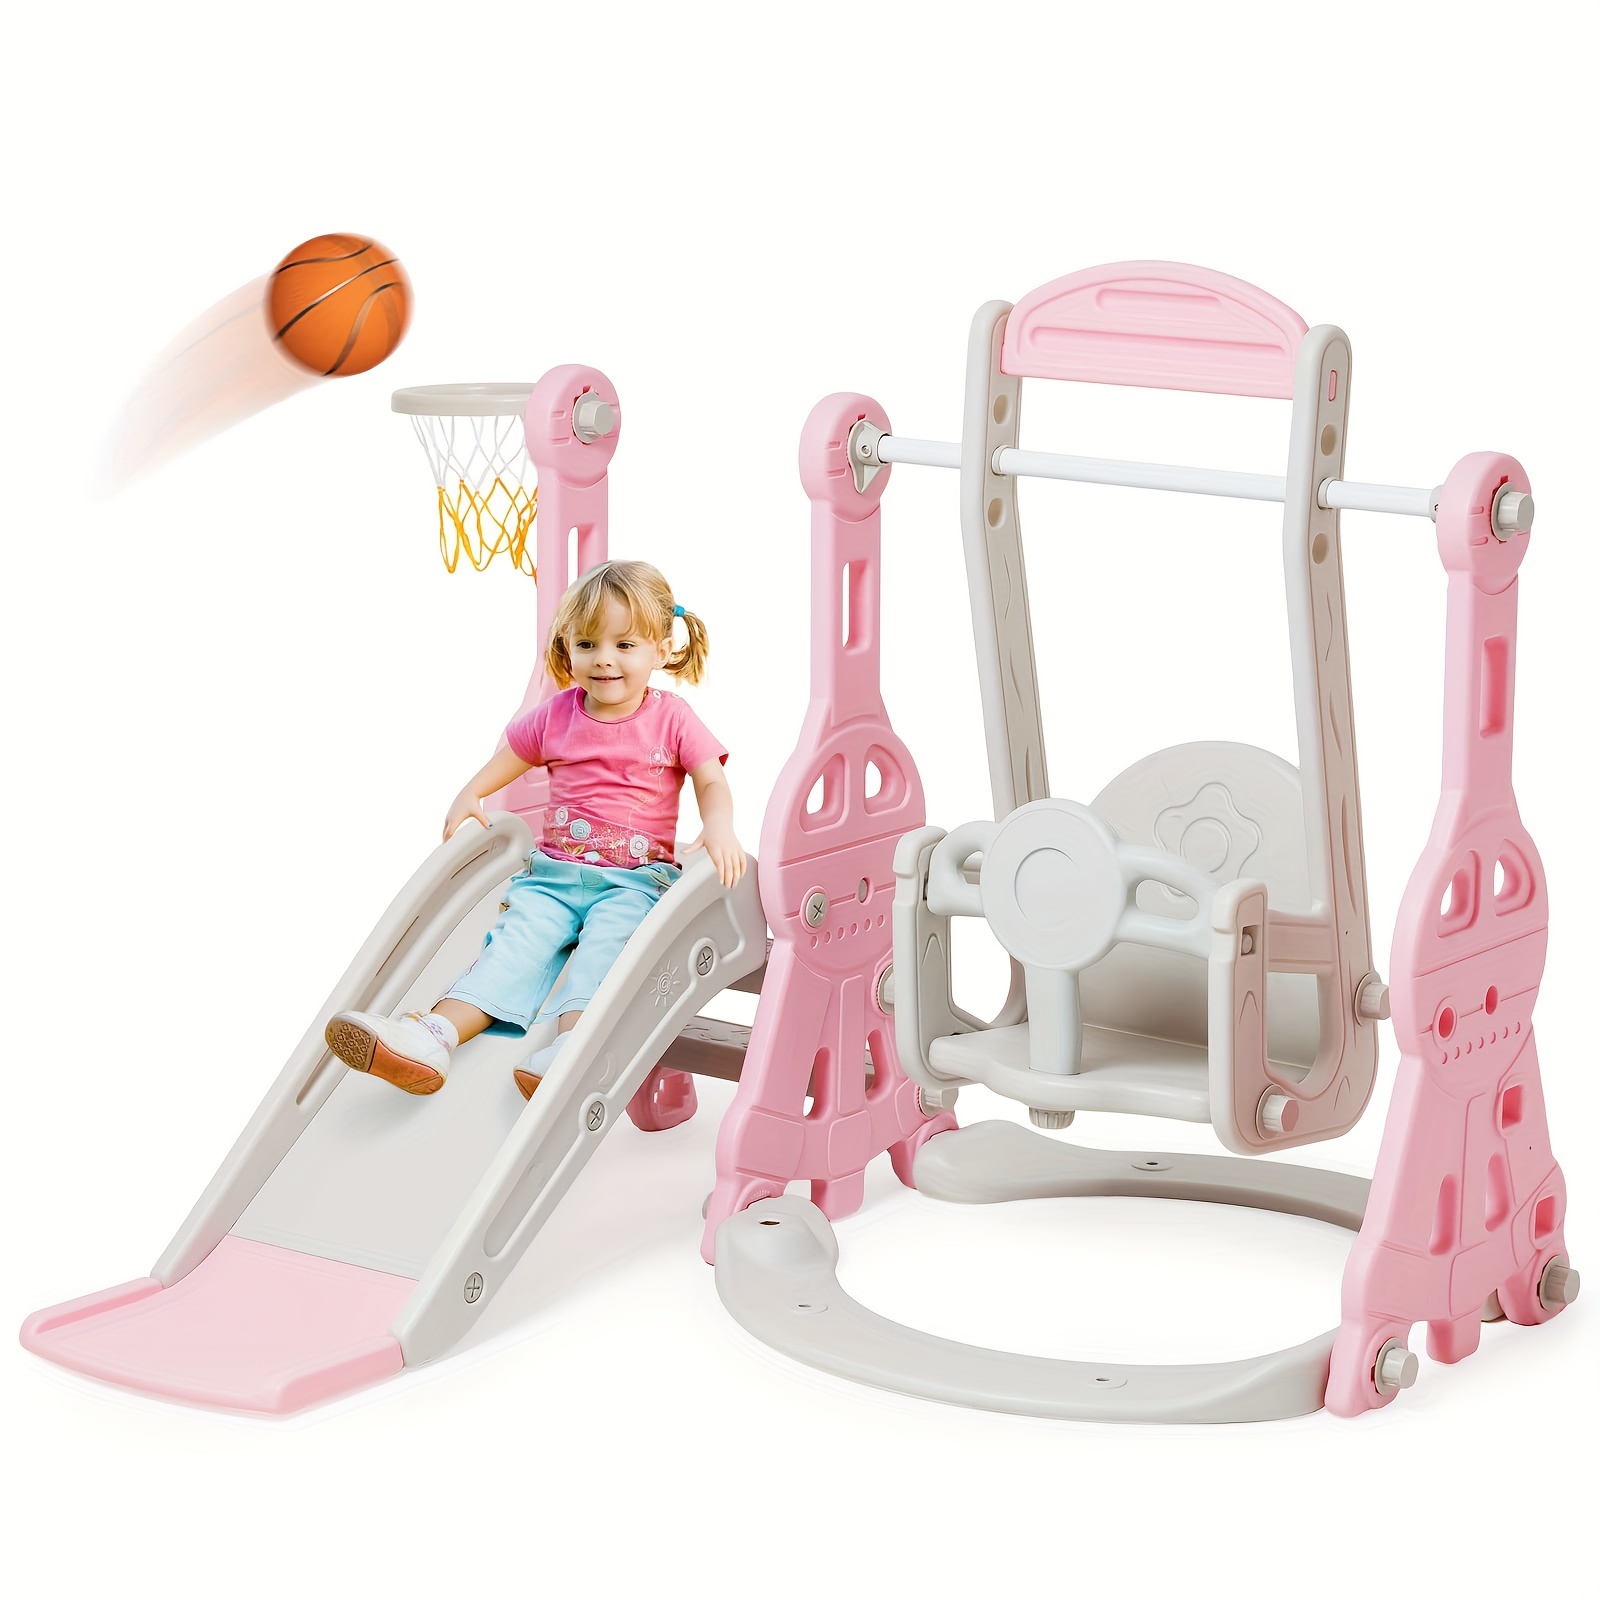 

Slide And Swing Set 4 In 1 Climber Playset With Swing Slide Climber And Basketball Slide And Swing Set Indoor Outdoor Backyard Playground Toy (pink) Christmas Gift